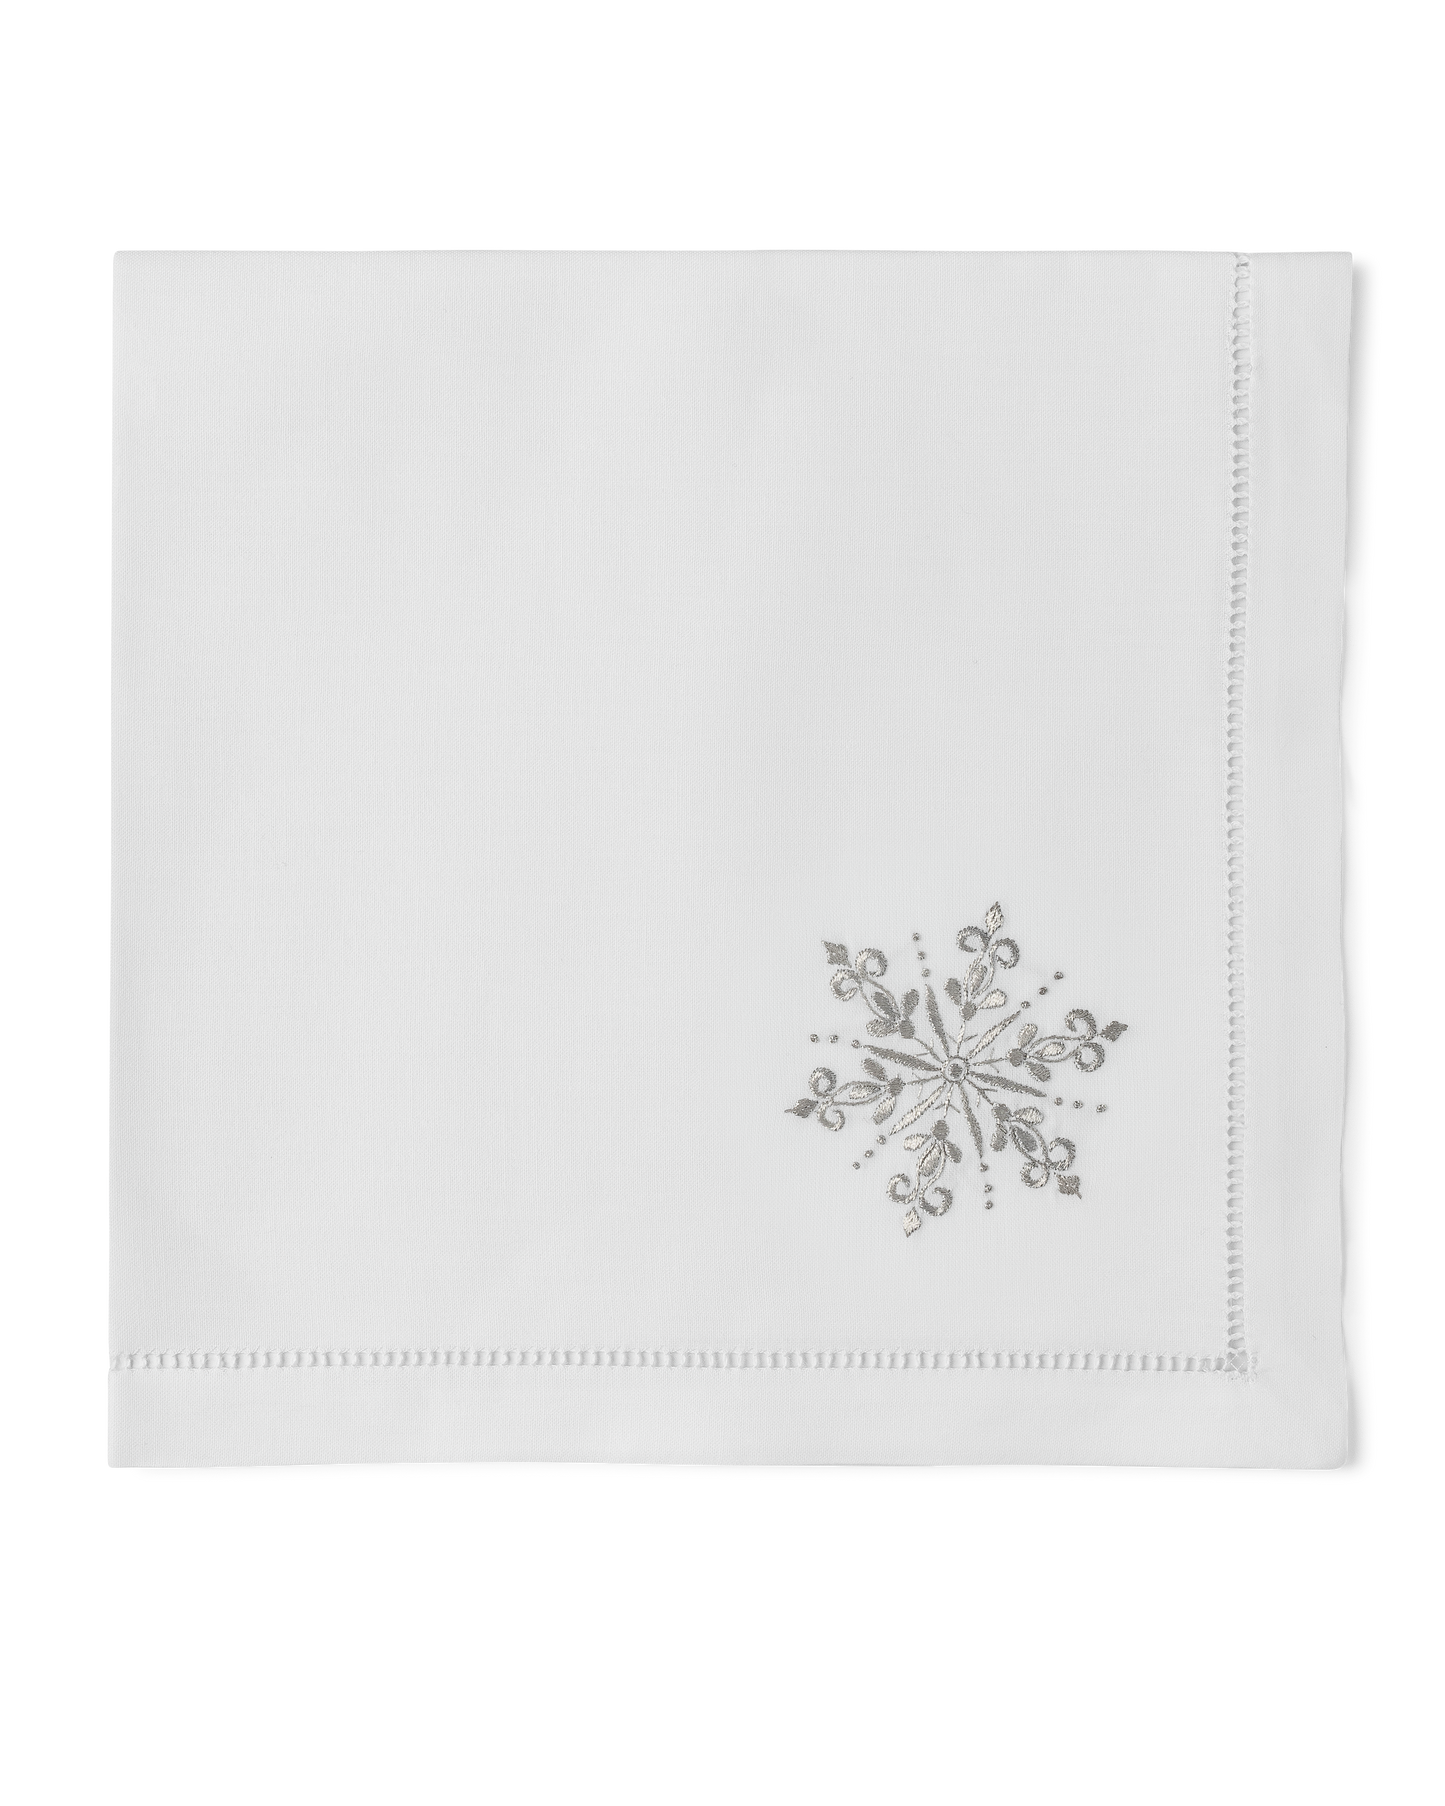 A white napkin with a hemstitch. A silver snowflake is embroidered in the bottom right corner